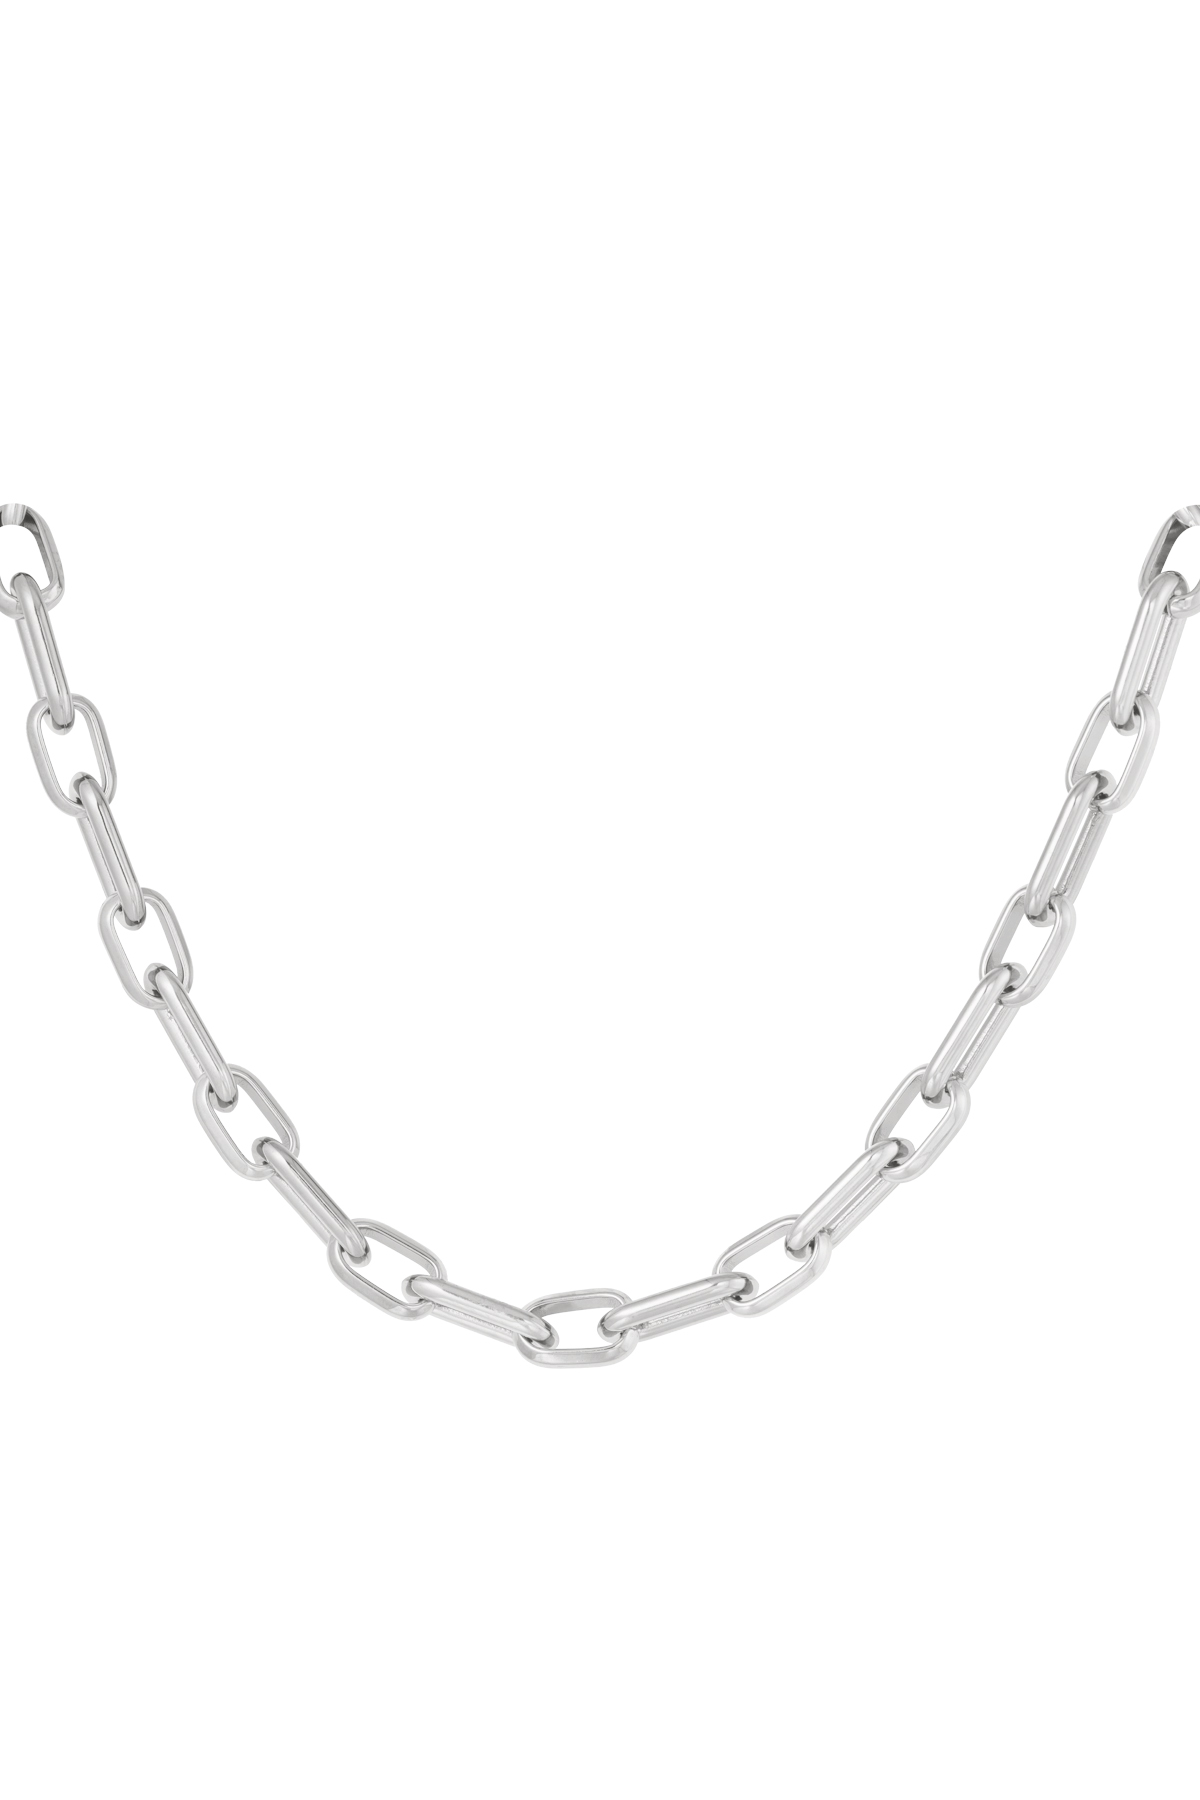 Necklace elongated links with charms - silver